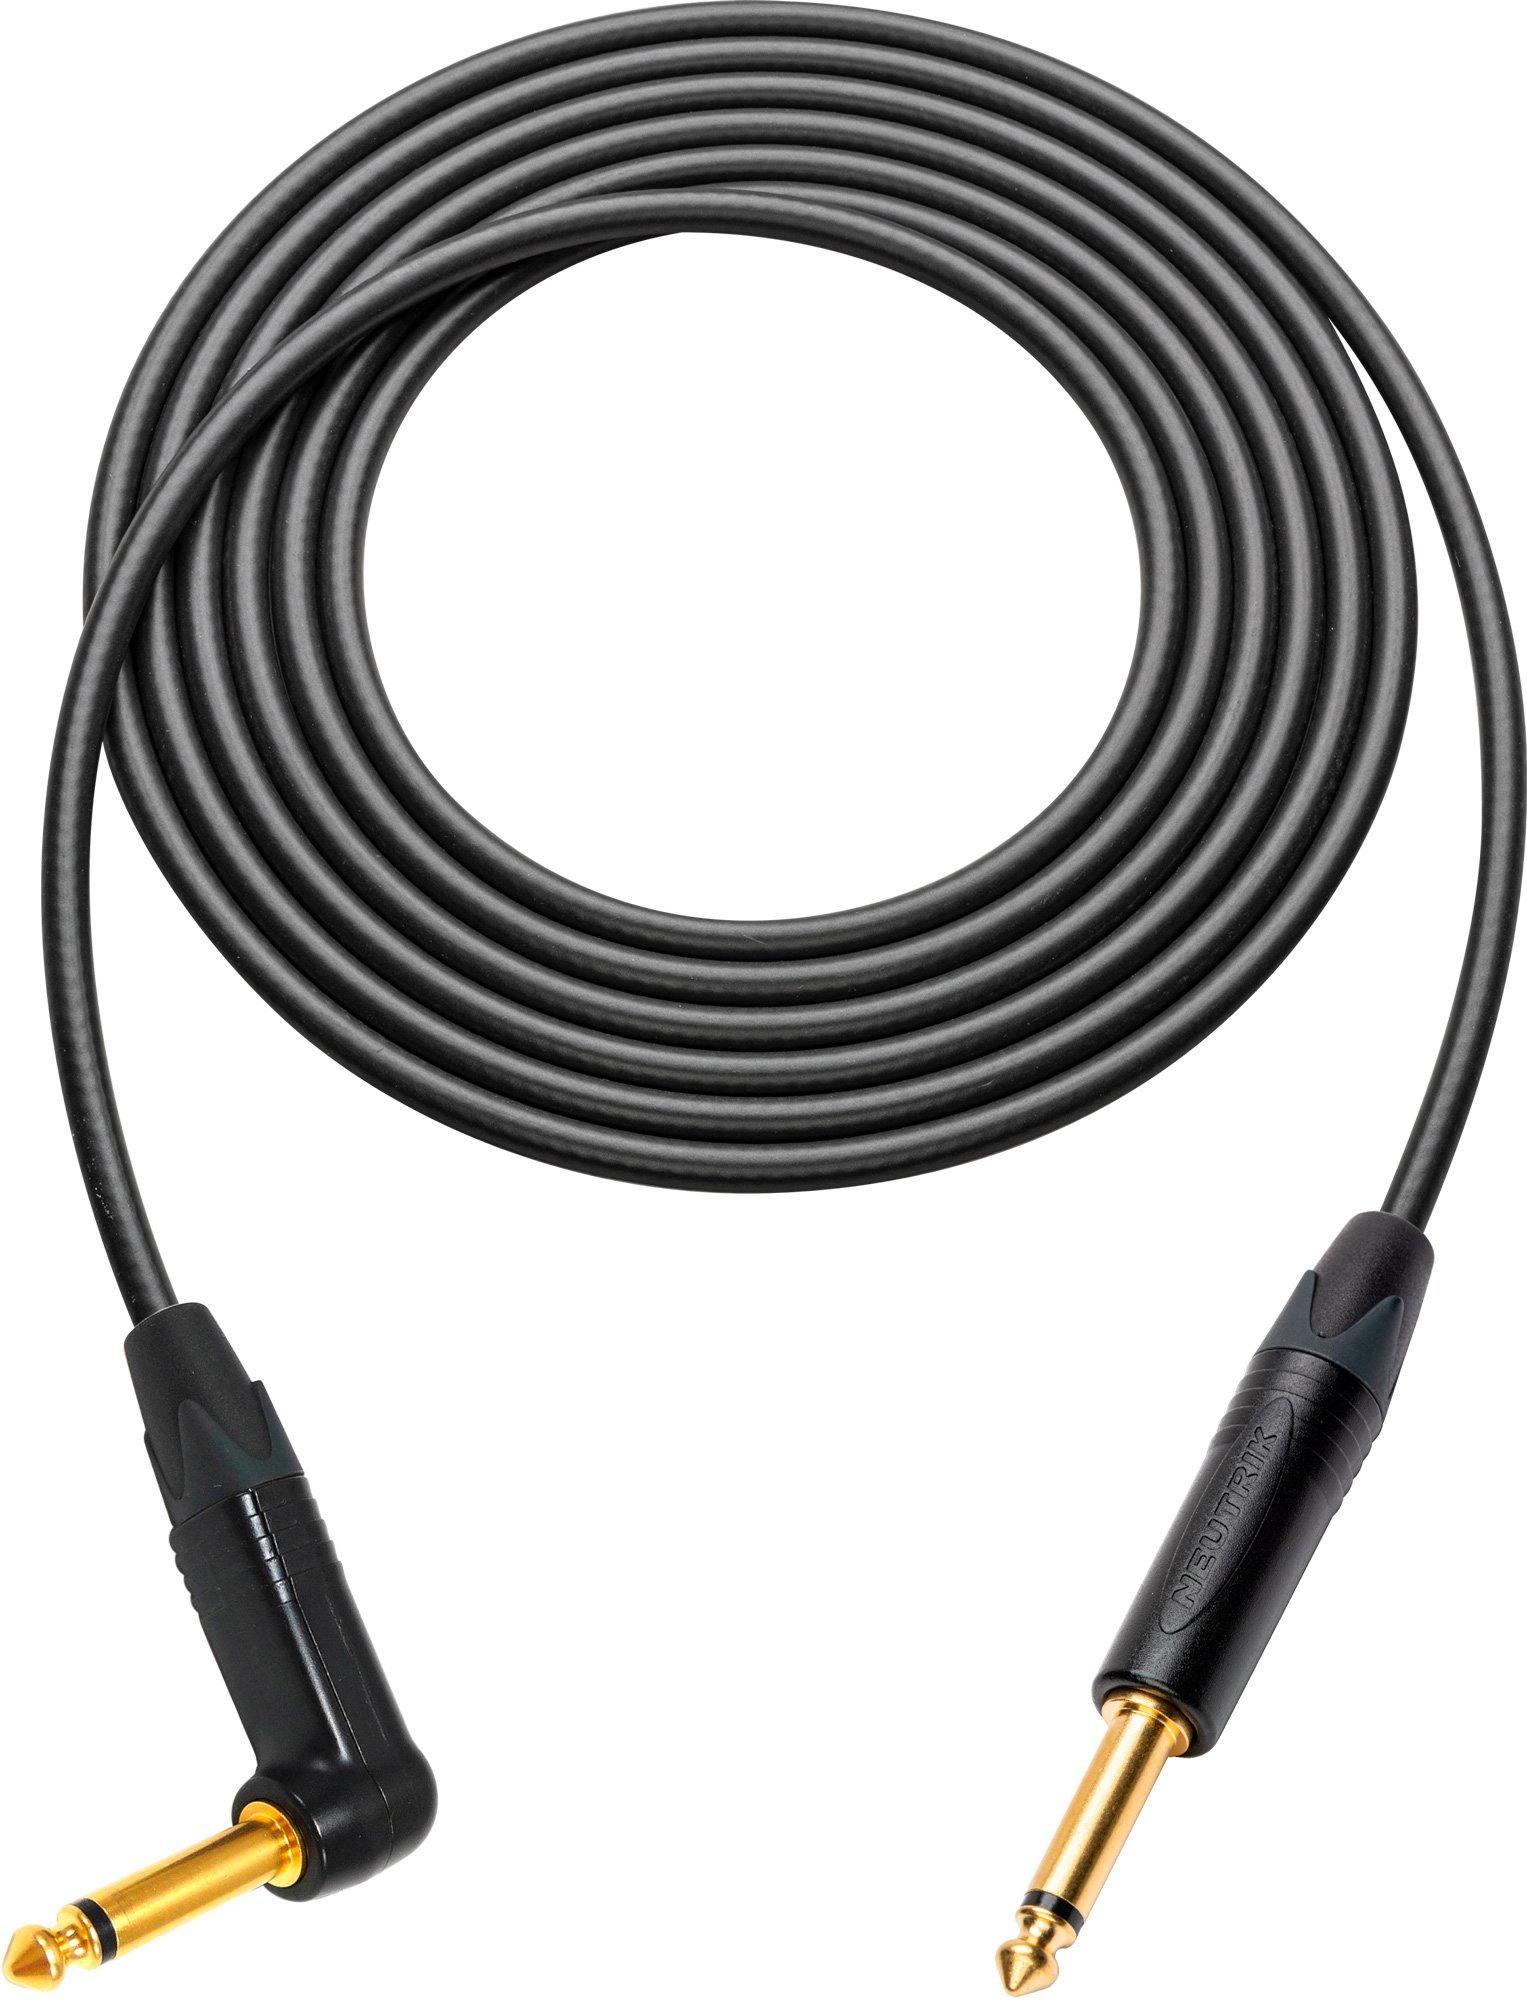 Canare GS-6 Cable Black with Neutrik XS 1/4-1/4 RA Phone Plugs - 50Ft